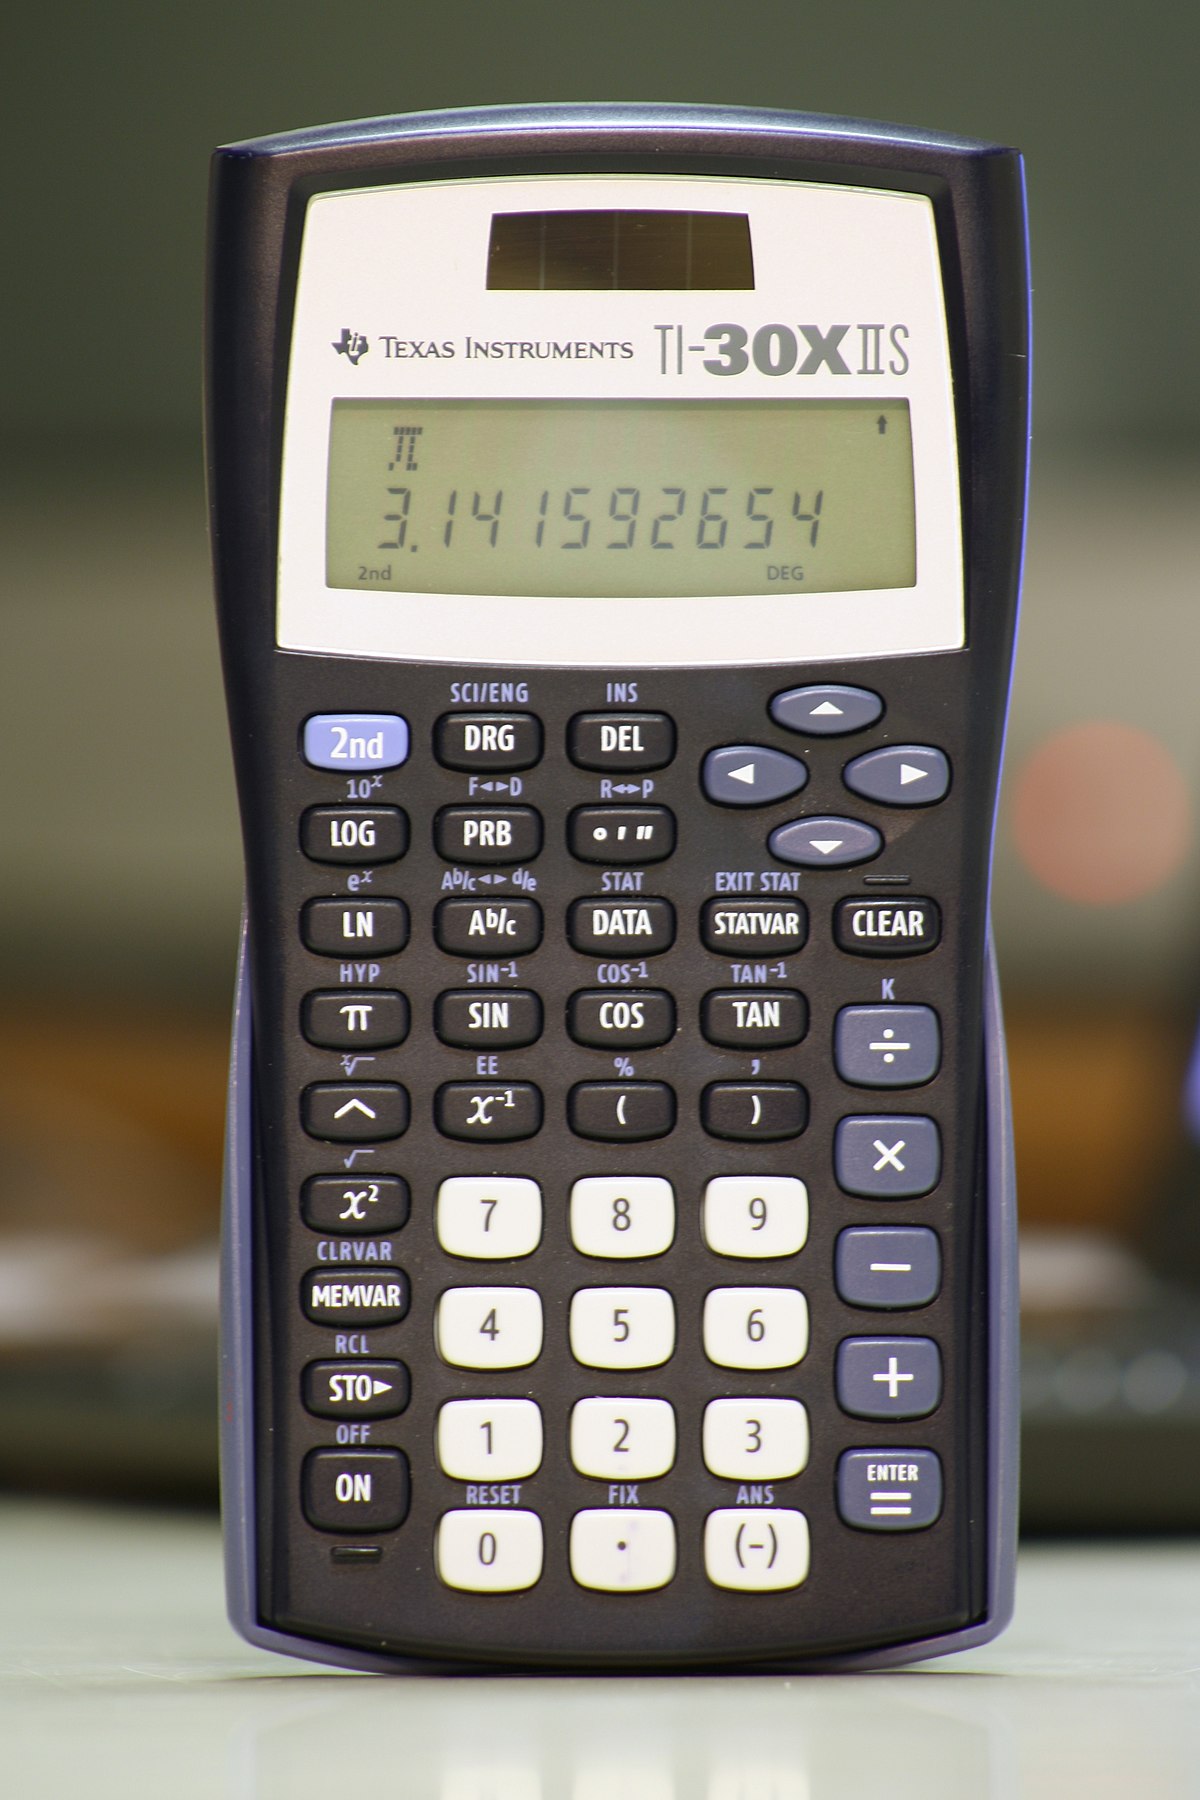 Advanced scientific calculator features Natural Textbook Display and  improved math functionality. Calculator is designed to be the perfect  choice for